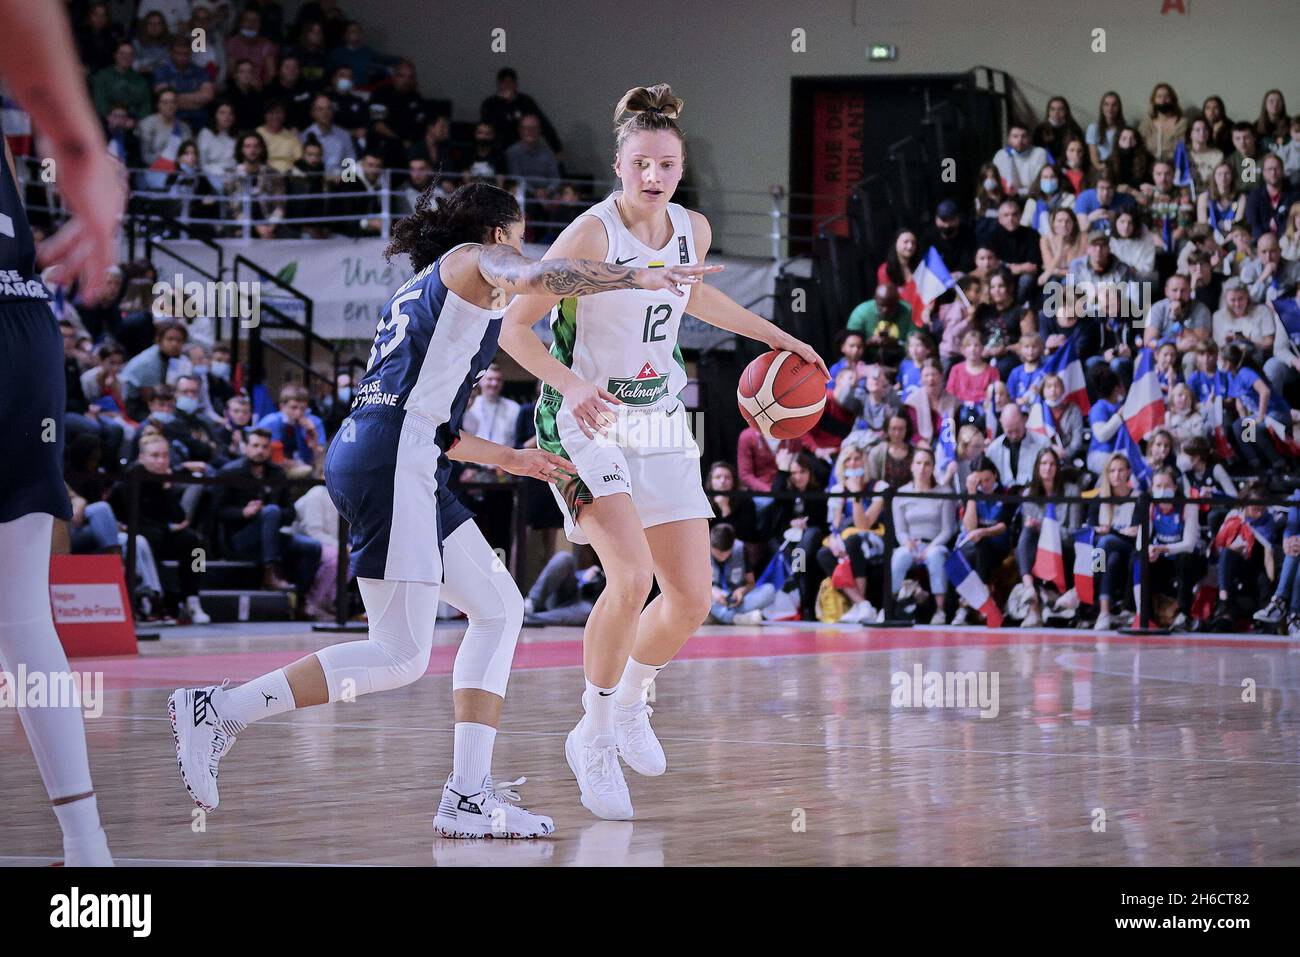 Villeneuve-d'Ascq, France. Nov 14 2021: Laura JUSKAITE (12) of Lithuania during the FIBA Women's EuroBasket 2023, Qualifiers Group B Basketball match between France and Lithuania on November 14, 2021 at Palacium in Villeneuve-d'Ascq, France - Photo: Ann-dee Lamour/DPPI/LiveMedia Credit: Independent Photo Agency/Alamy Live News Stock Photo